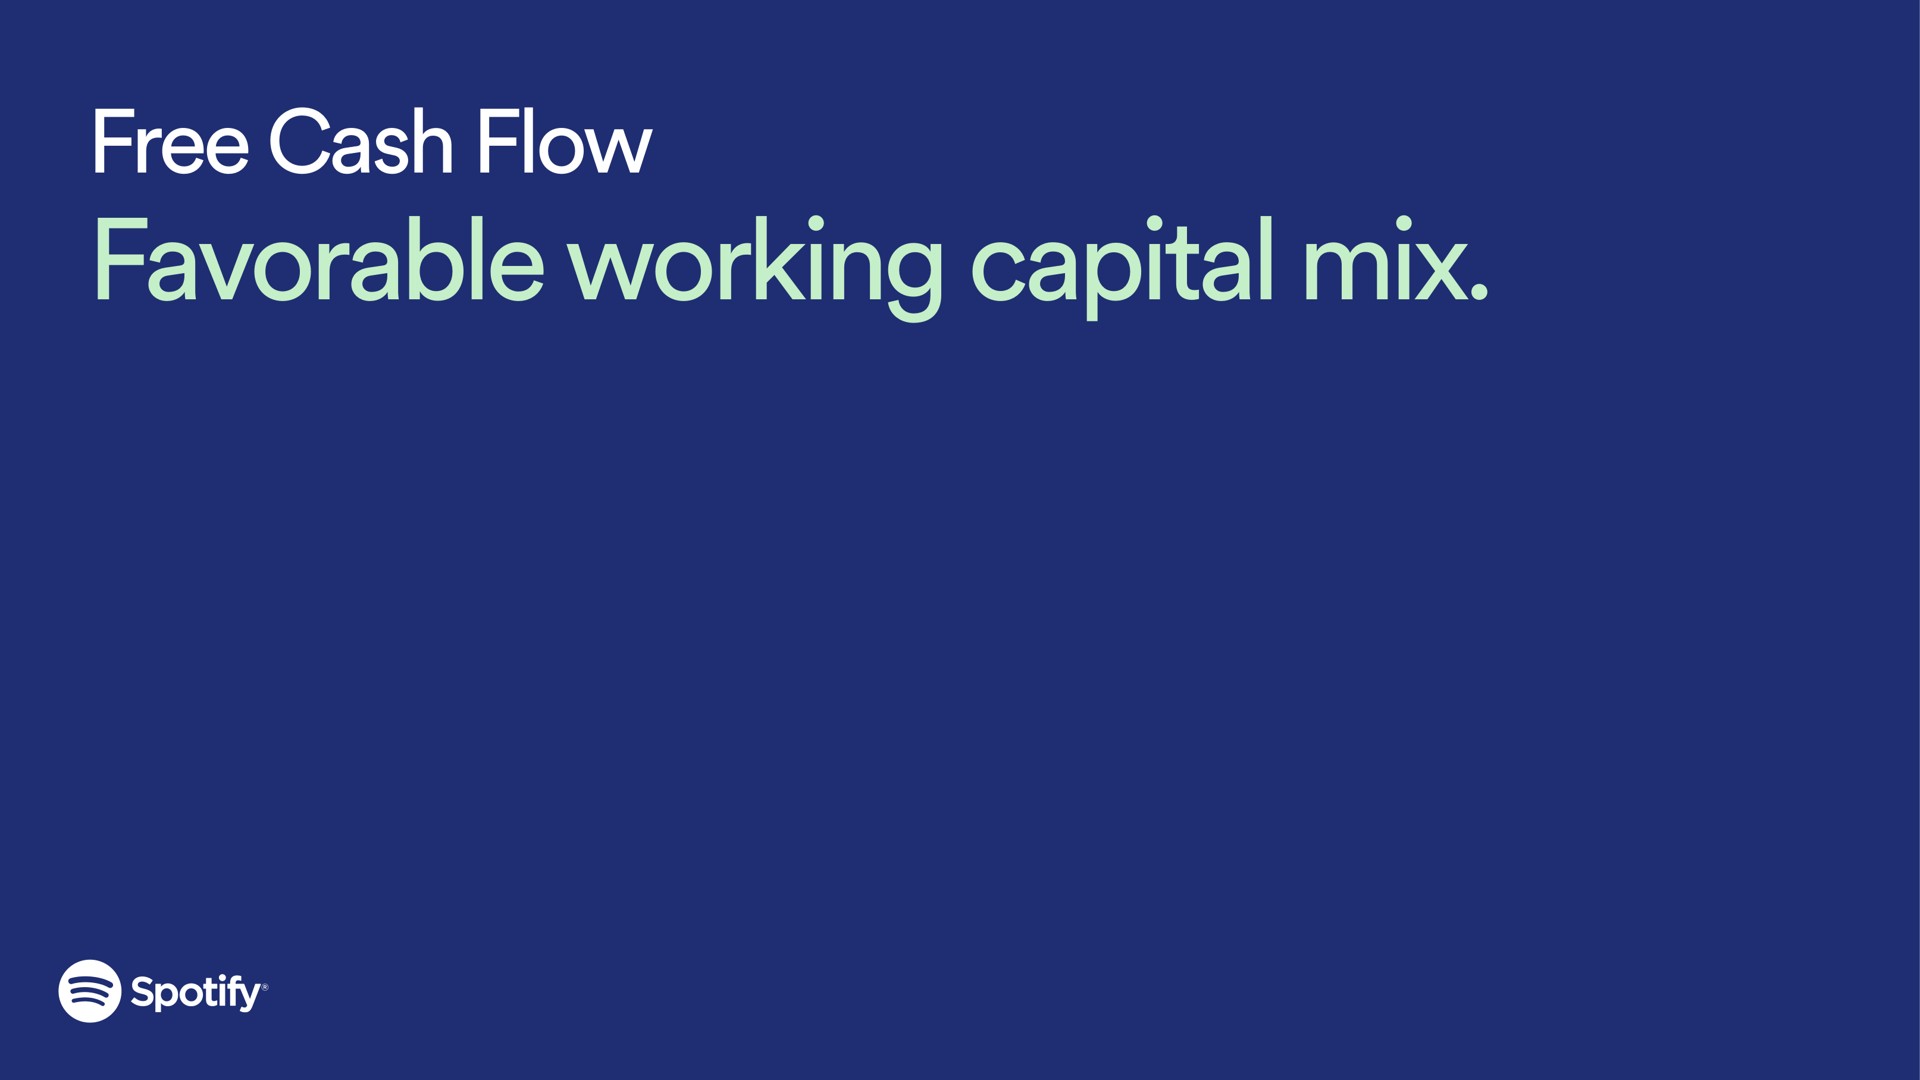 free cash flow favorable working capital mix | Spotify